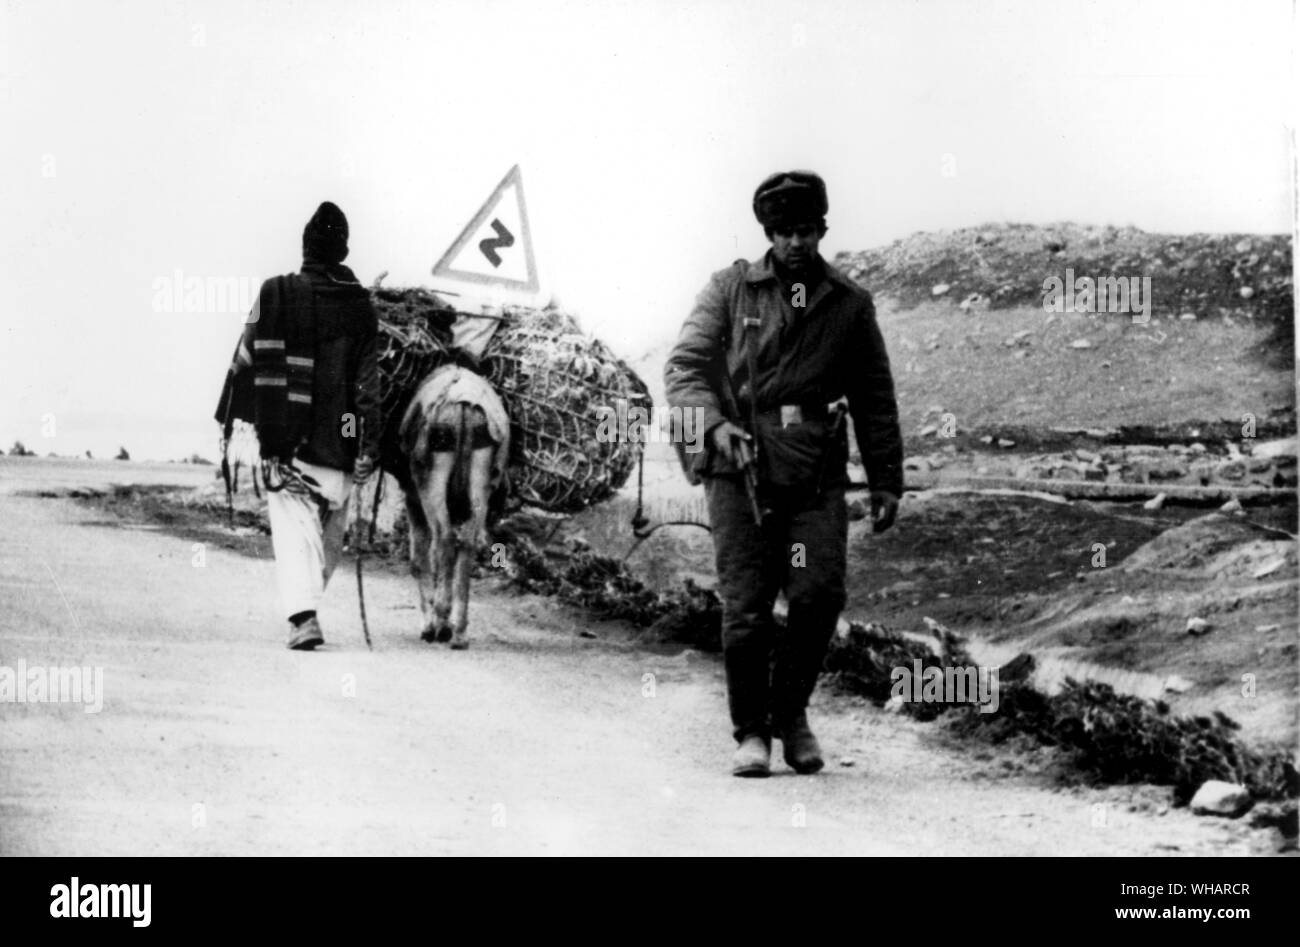 Kabul Afghanistan. Russian soldier on patrol passes Afghan villager and his donkey on lonely mountain road near Kabul Stock Photo